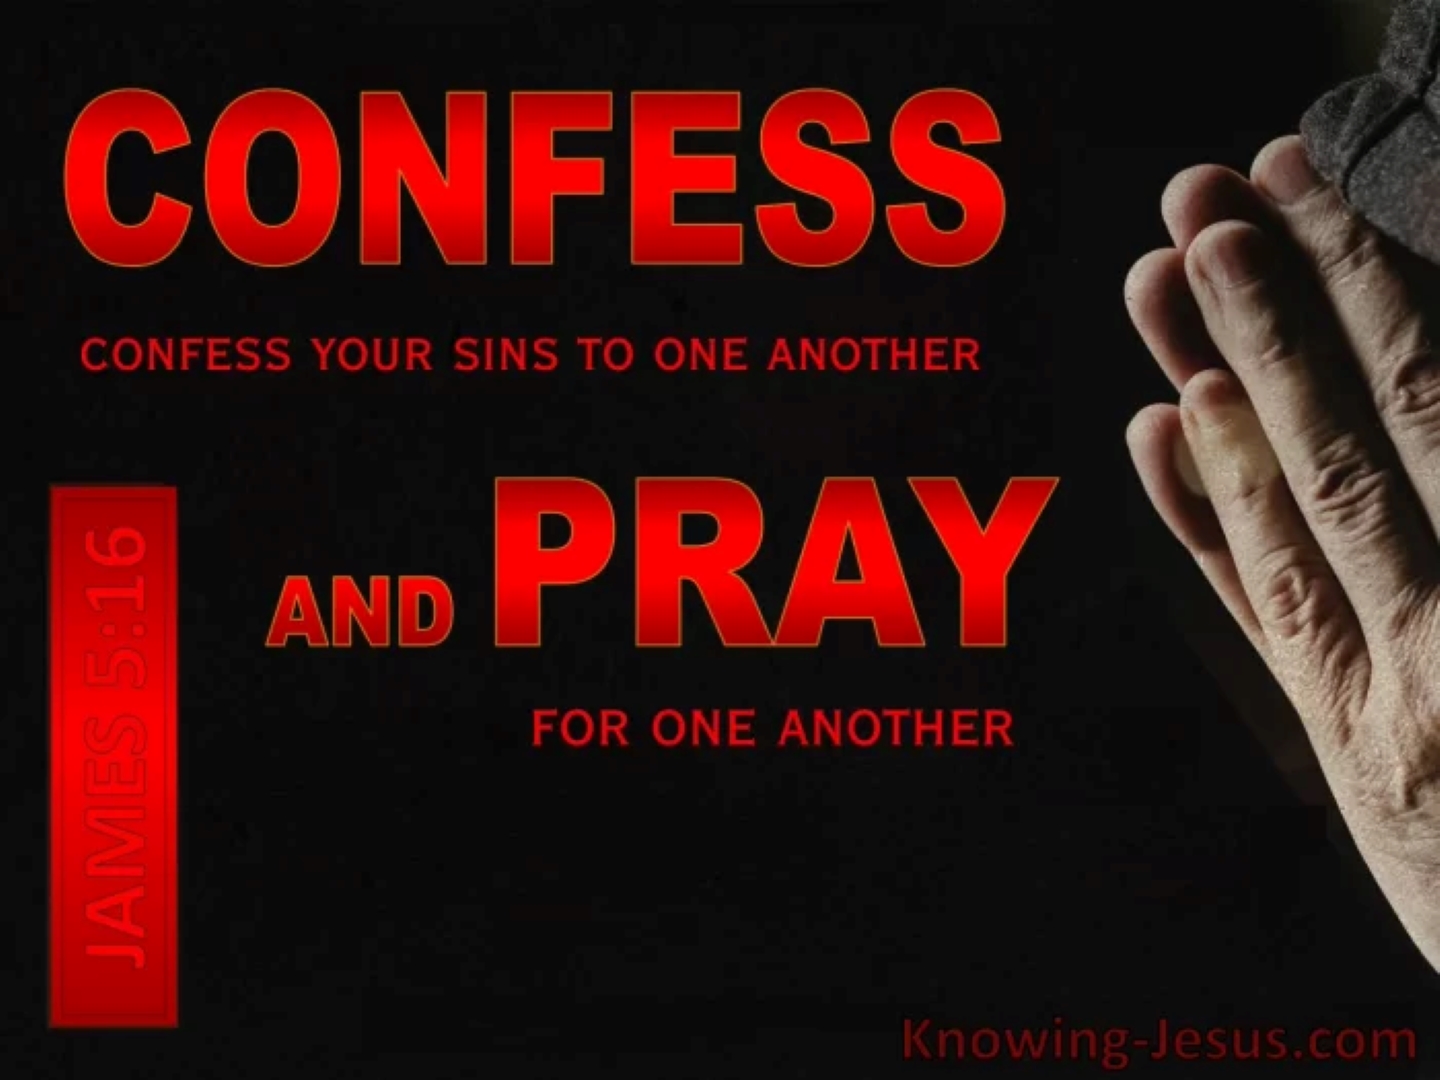 Confess Your Sins to One Another (James 5:16)